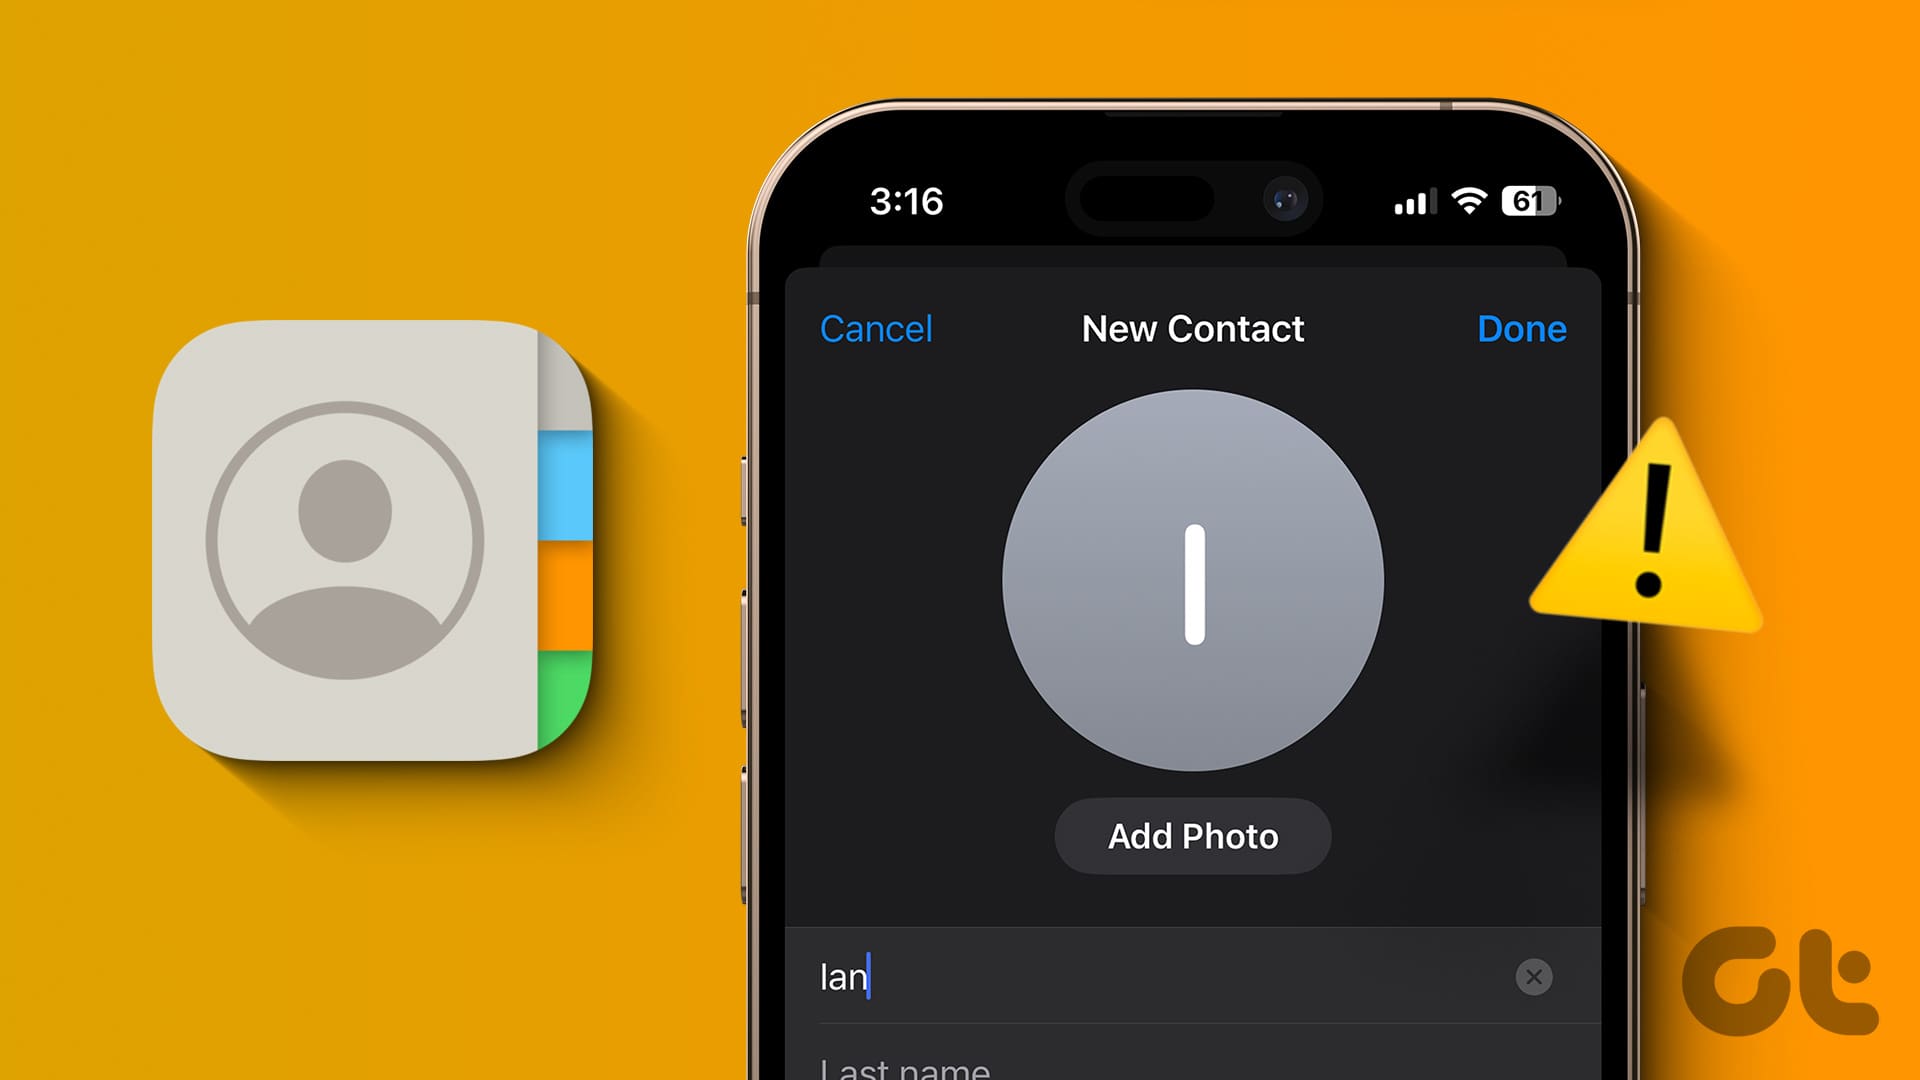 Top 5 Fixes for iPhone Not Saving Contacts